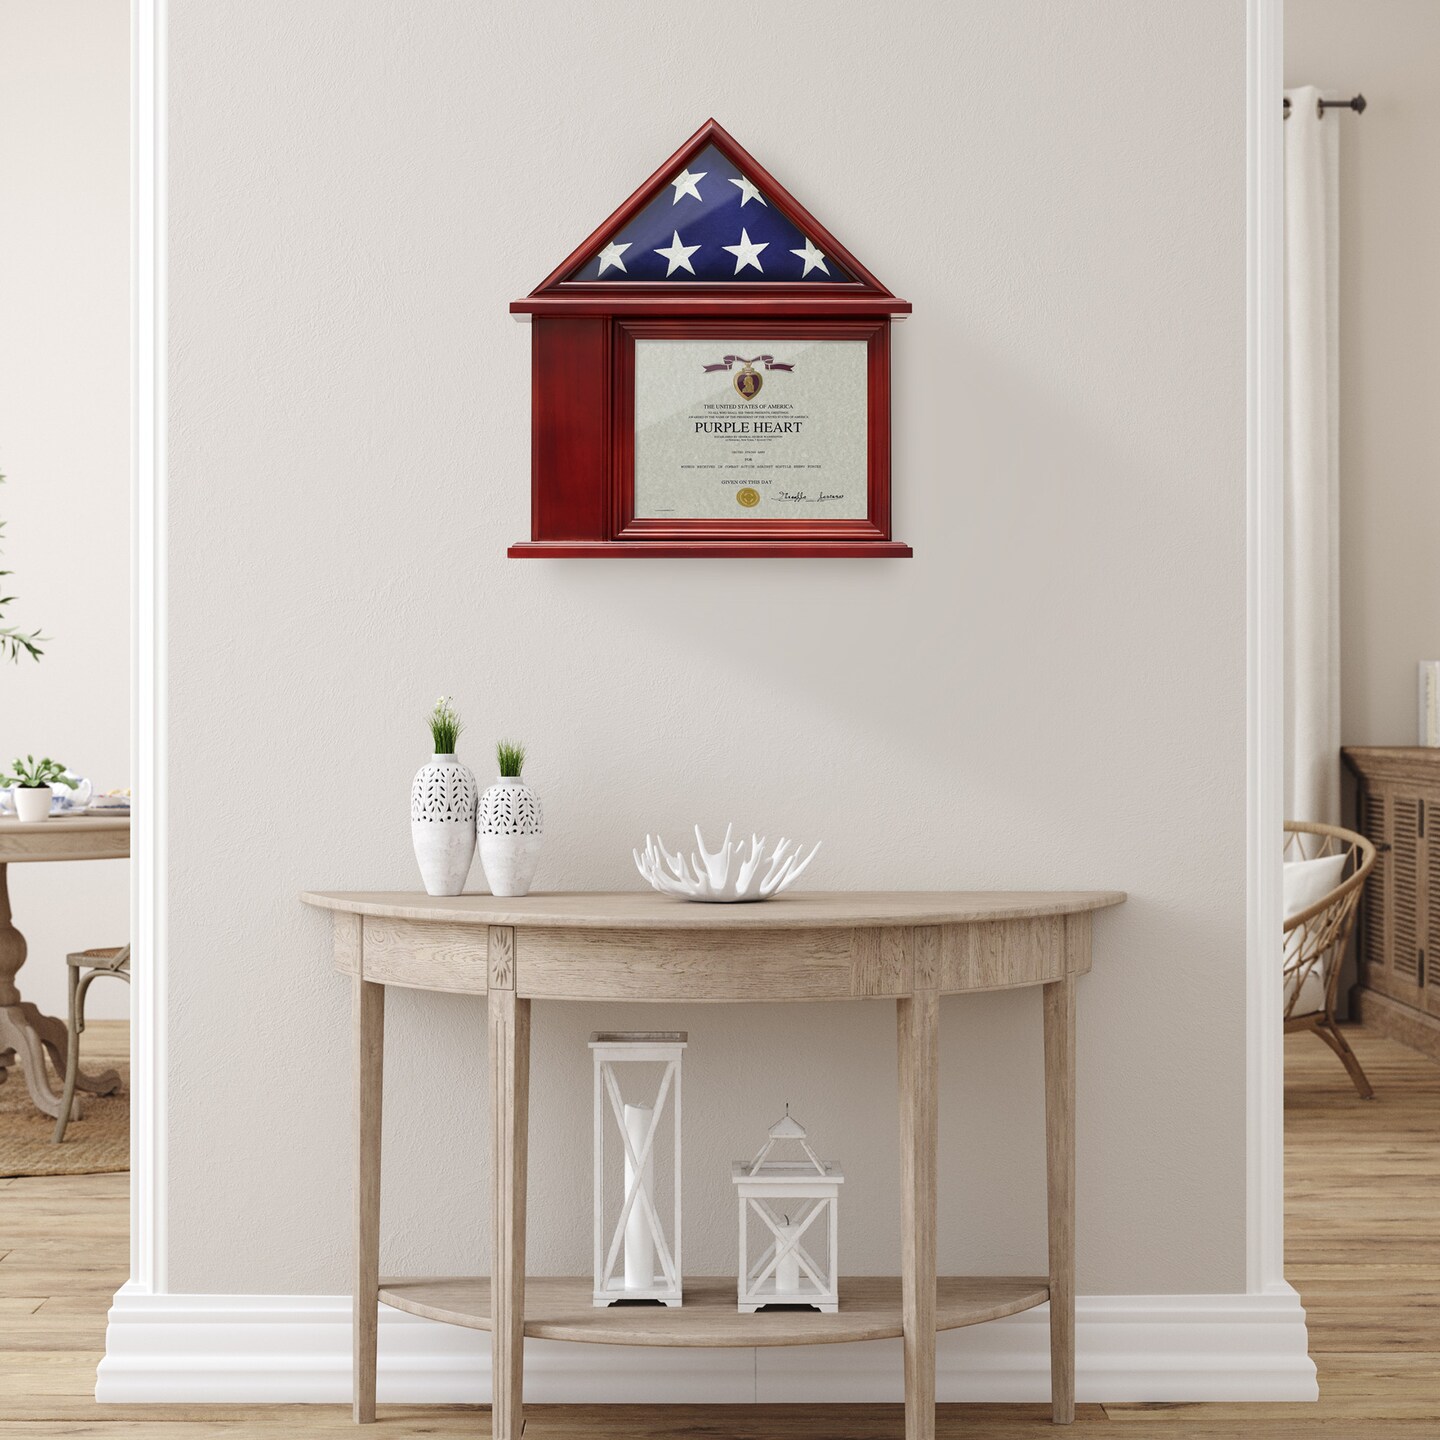 Reminded Flag Case and Certificate Display, Military Shadow Box Frame fits 3&#x27; x 5&#x27; Flag, Solid Wood Cherry Finish